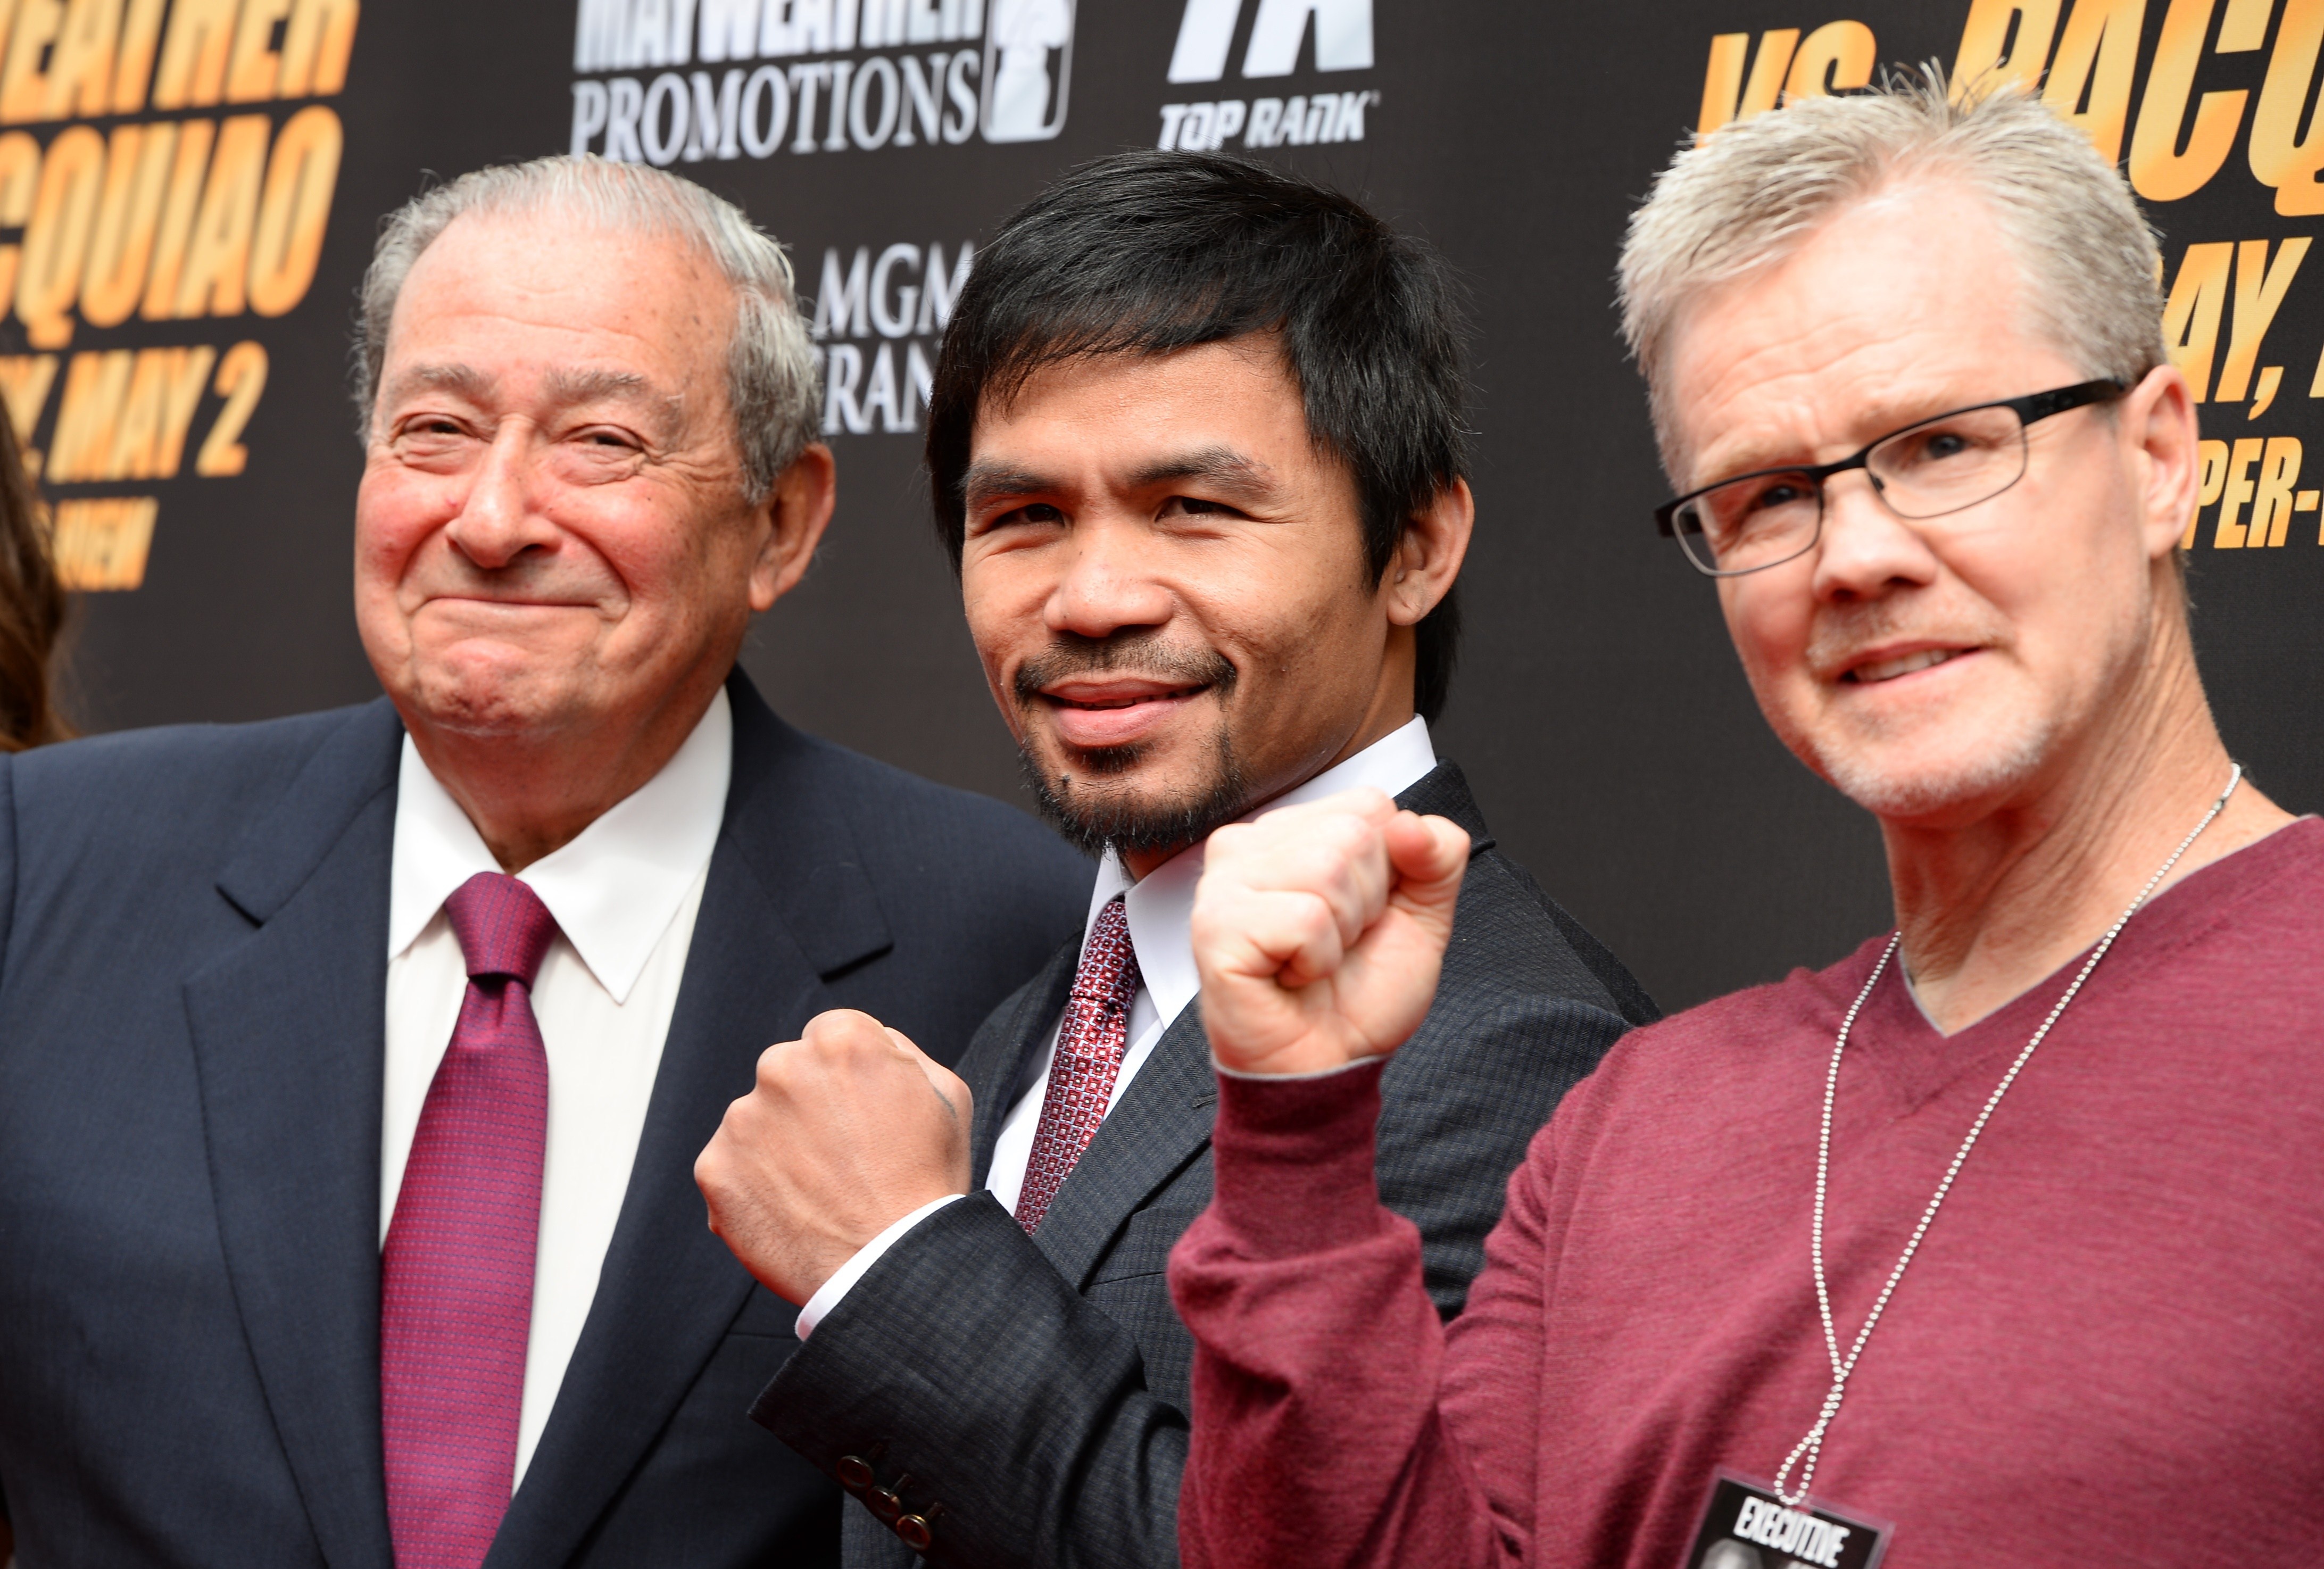 Manny Pacquiao (C), trainer Freddie Roach (L) and promoter Bob Arum arrive for a joint press conference with Floyd Mayweather Jr. (Getty)